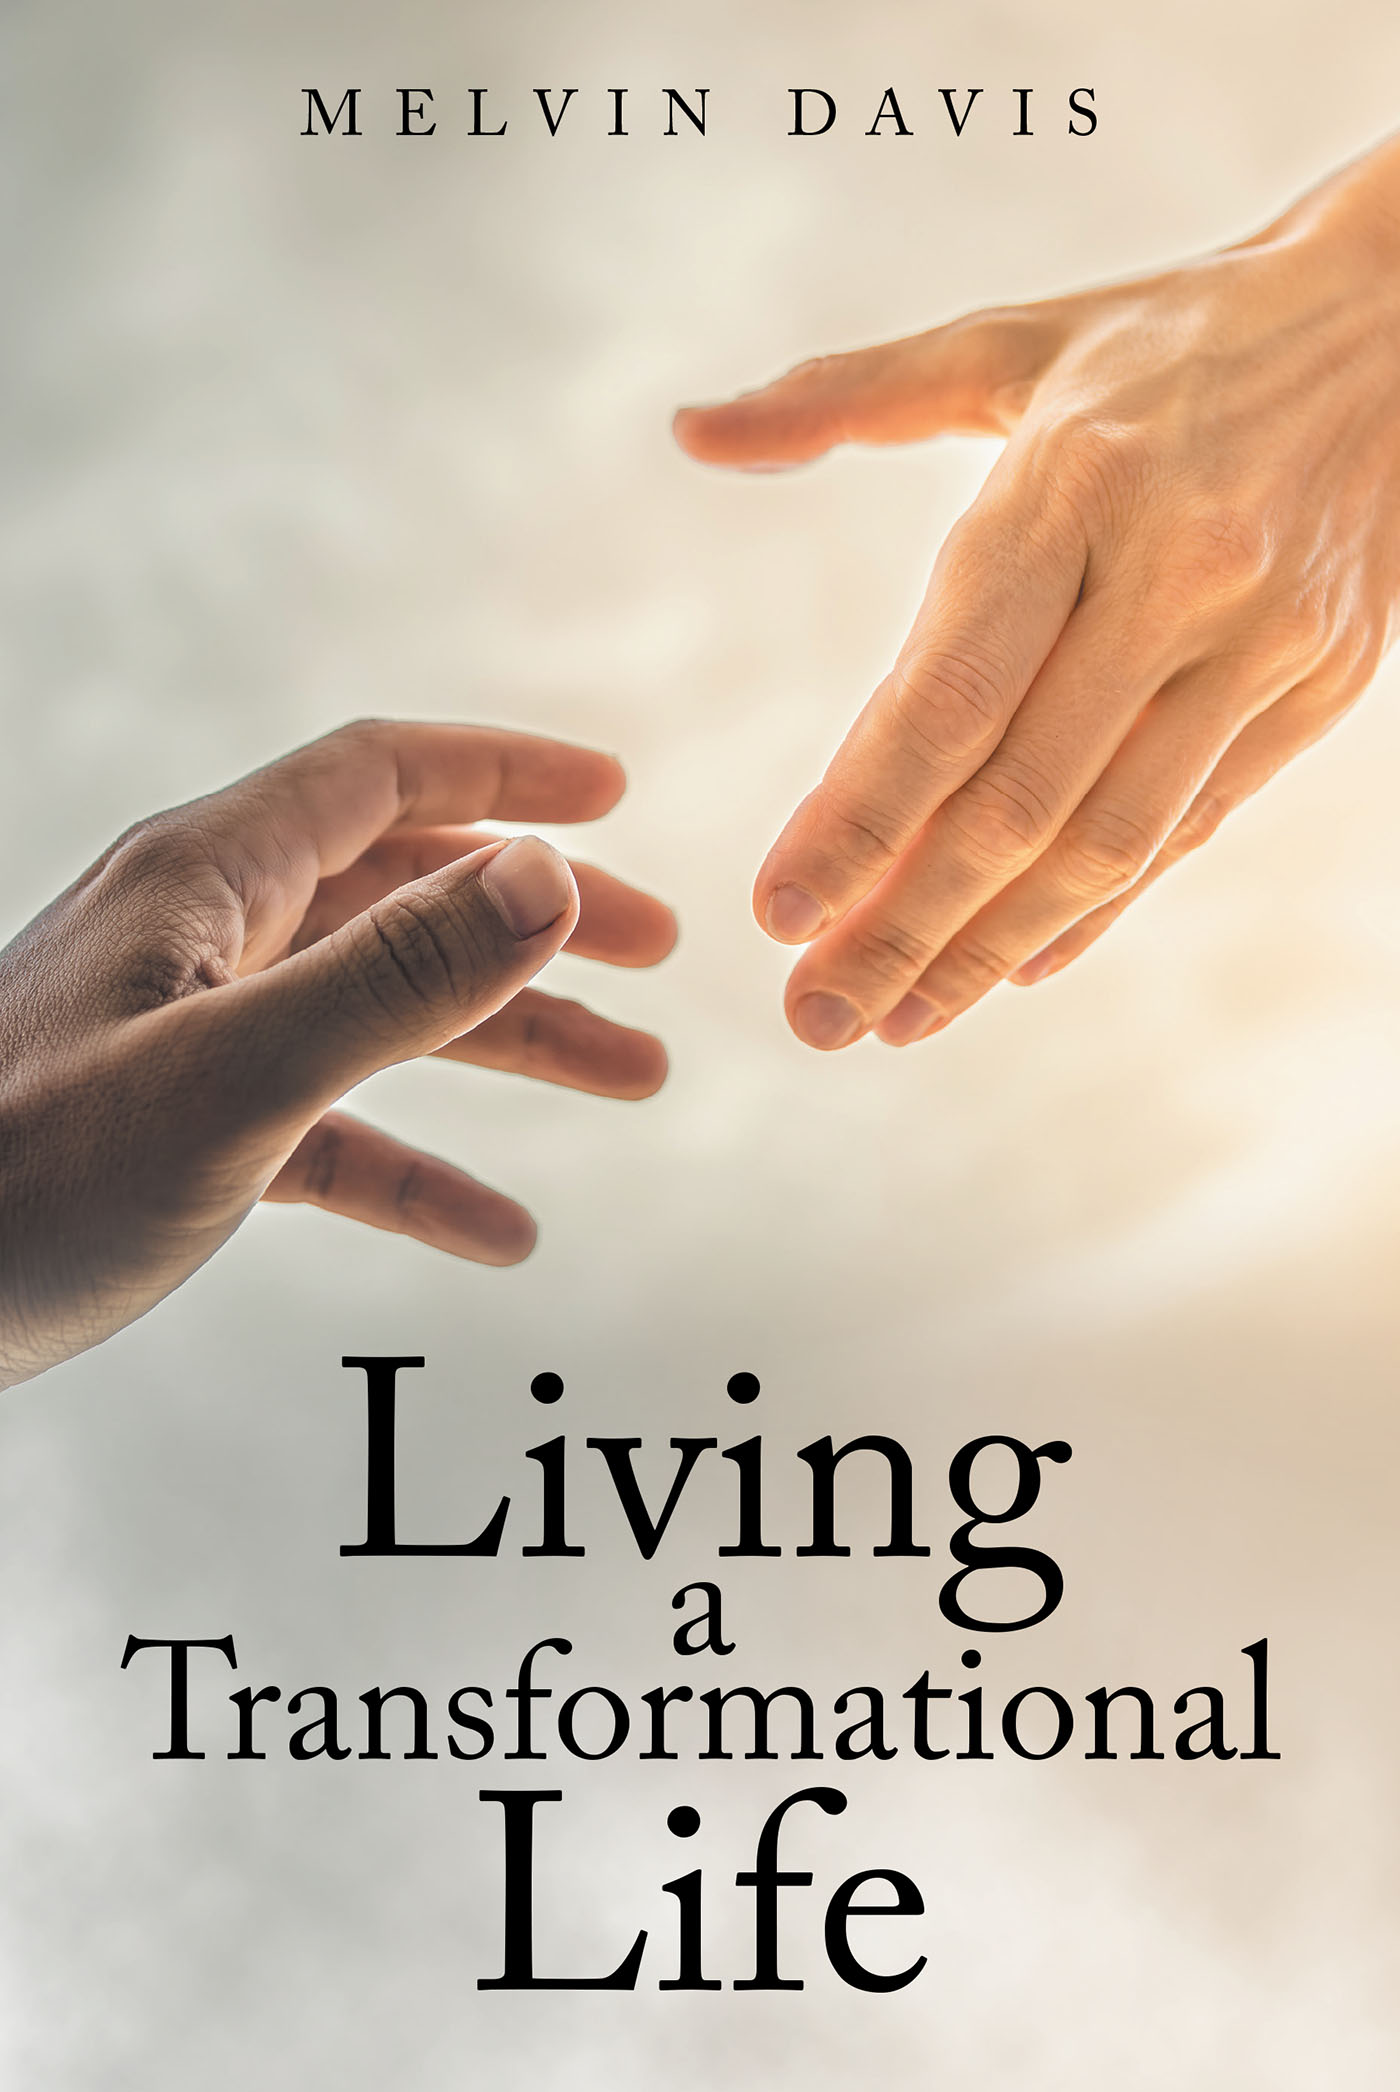 Melvin Davis’s Newly Released "Living a Transformational Life" is an Encouraging Message for Anyone Seeking Rejuvenation of Spirit